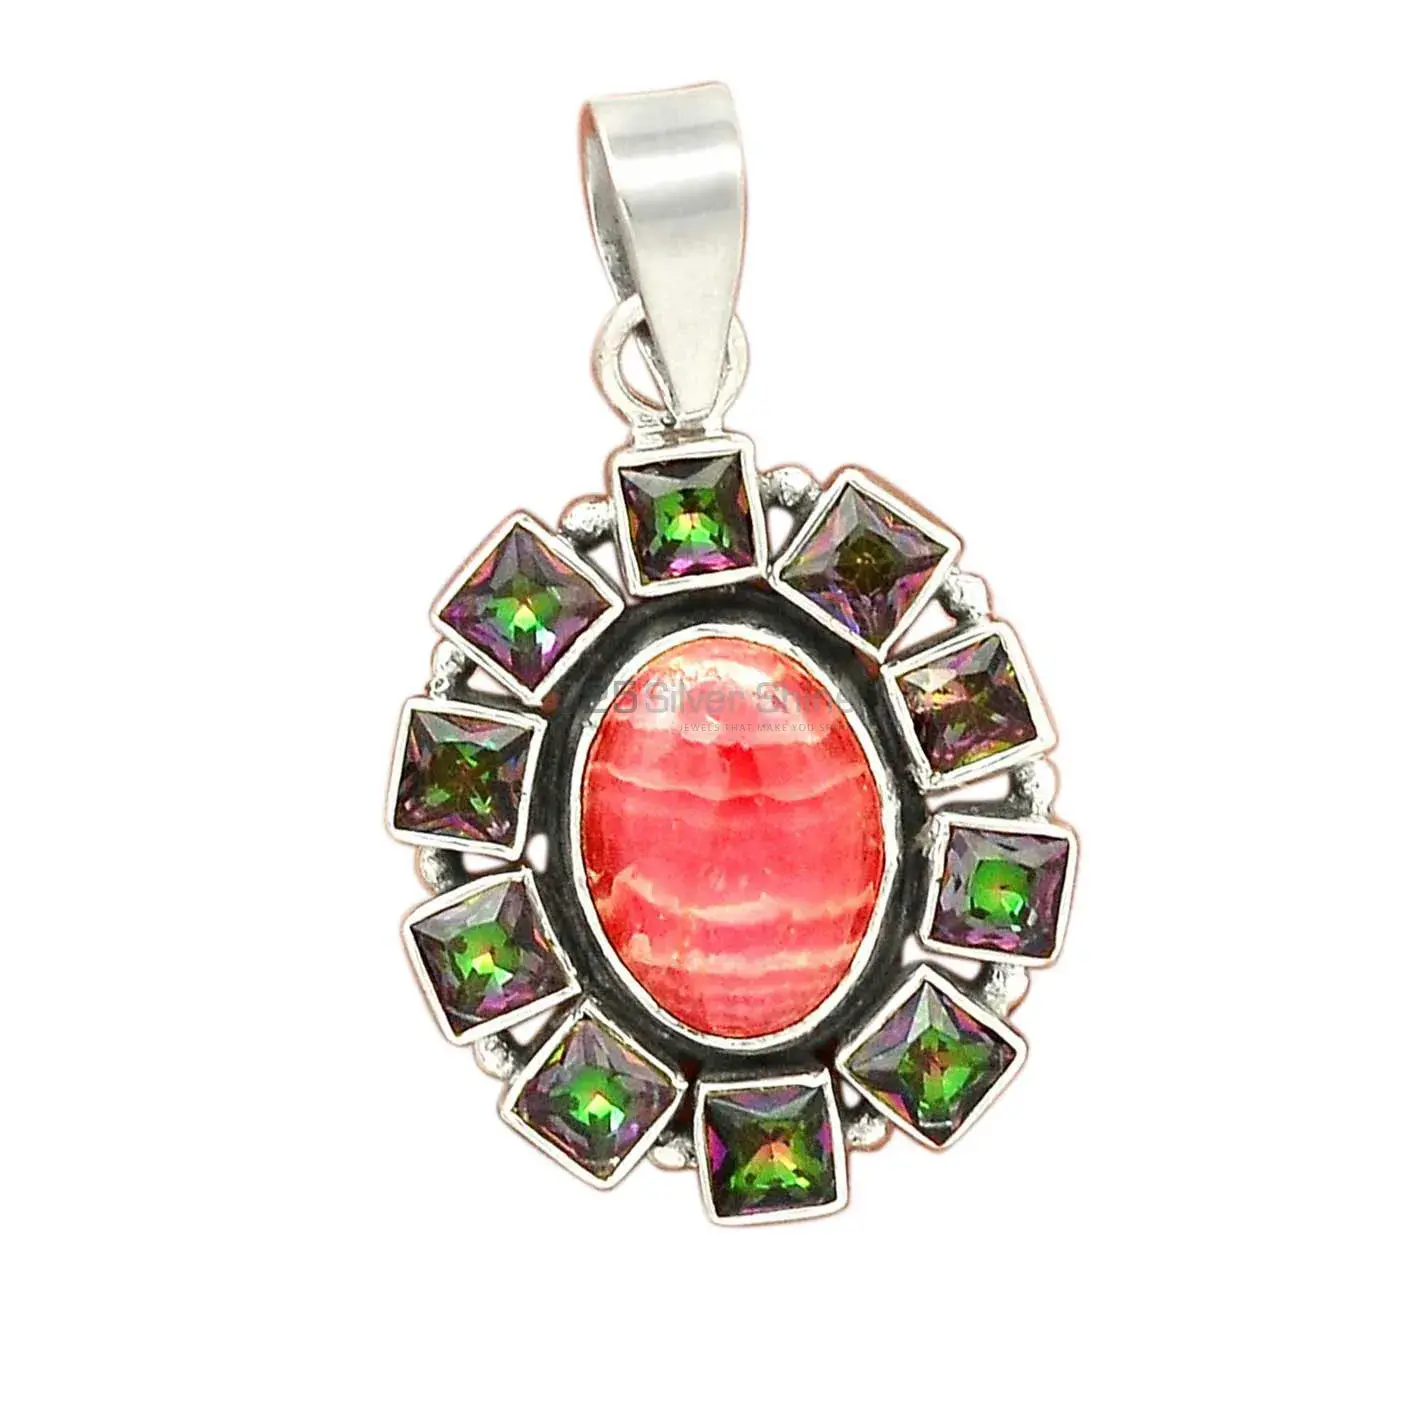 High Quality Solid Sterling Silver Handmade Pendants In Multi Gemstone Jewelry 925SP24-1_1